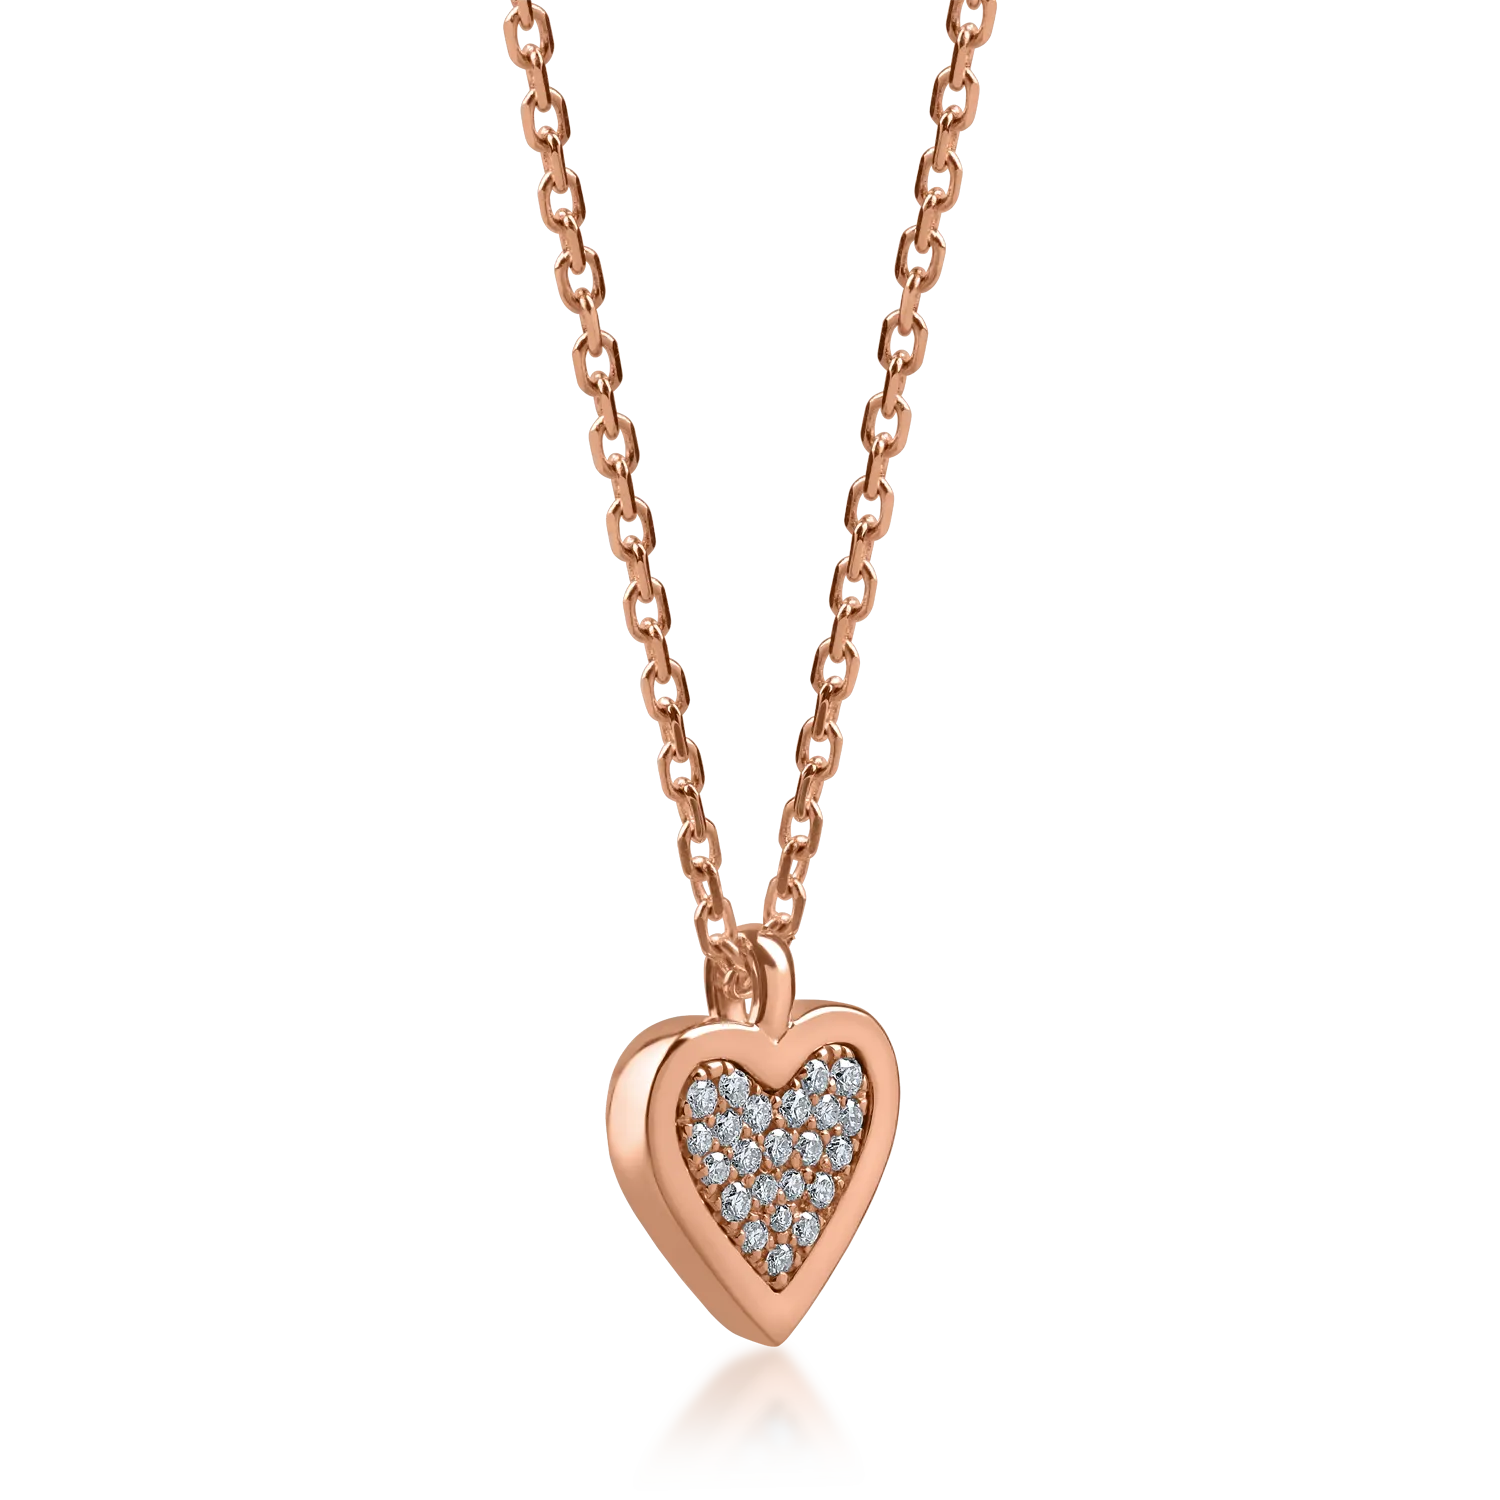 Rose gold heart pendant necklace with 0.13ct diamonds